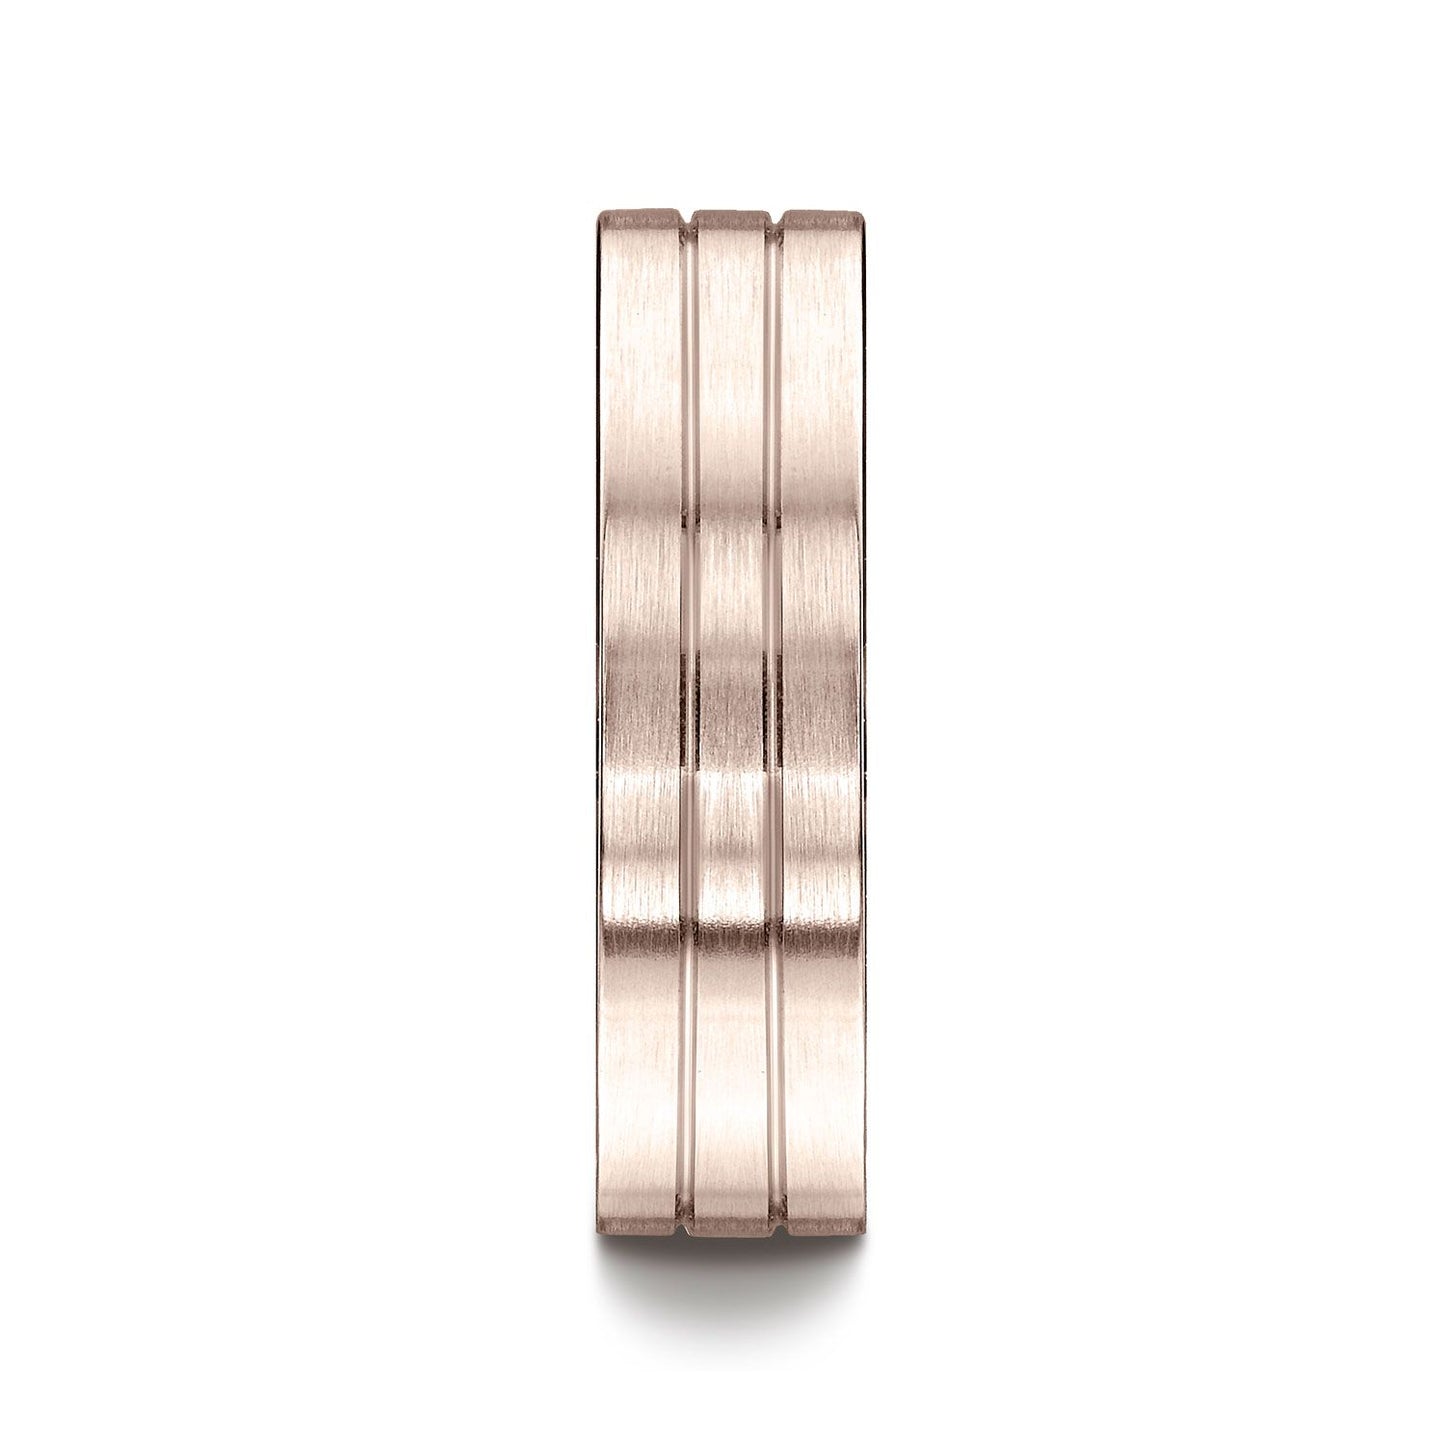 14k Rose Gold 6mm Comfort-fit Satin-finished With Parallel Center Cuts Carved Design Band